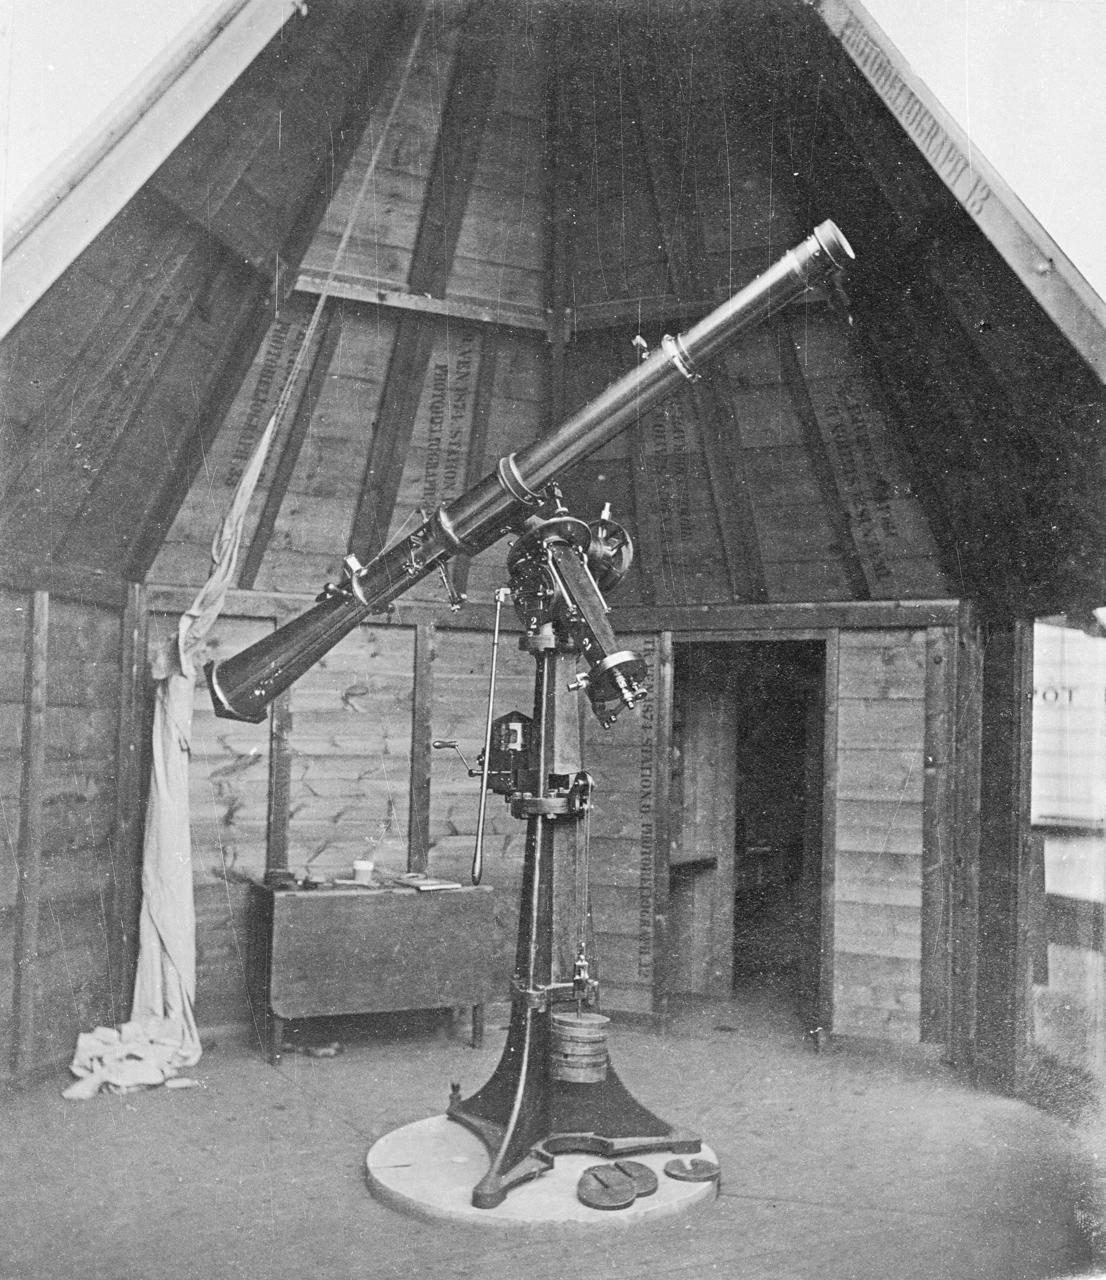 A Dallmeyer photoheliograph (AST0968). The square section at the end held the photographic glass plates that recorded the Sun’s disc.